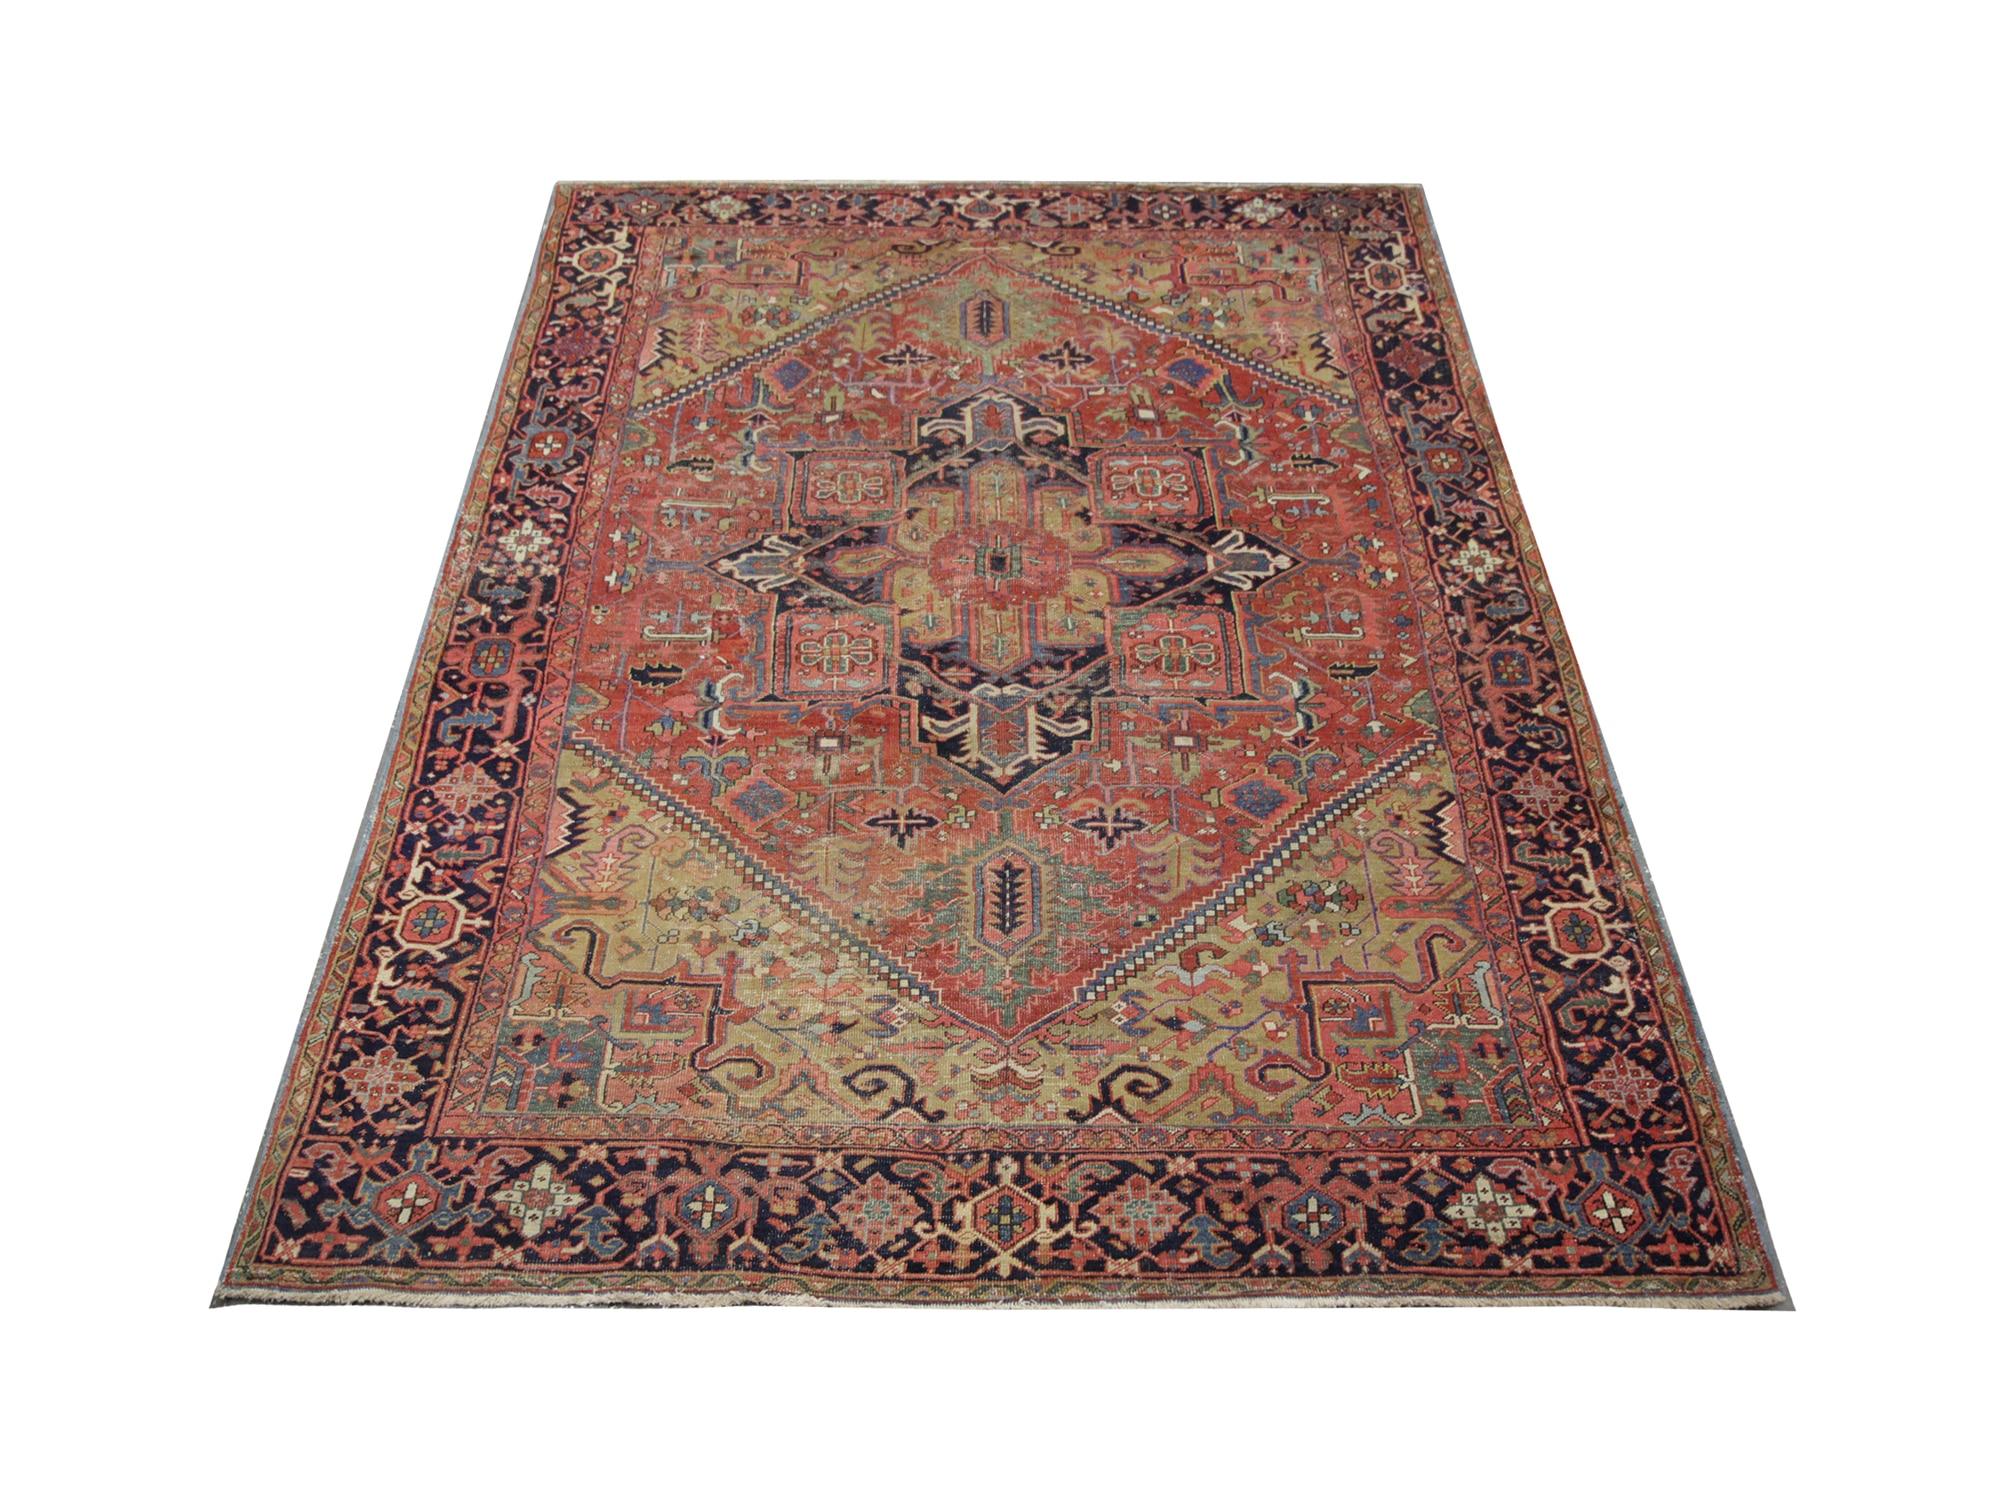 Antique Rugs, Handmade Carpet, Heriz Large Living Room Rugs In Excellent Condition For Sale In Hampshire, GB